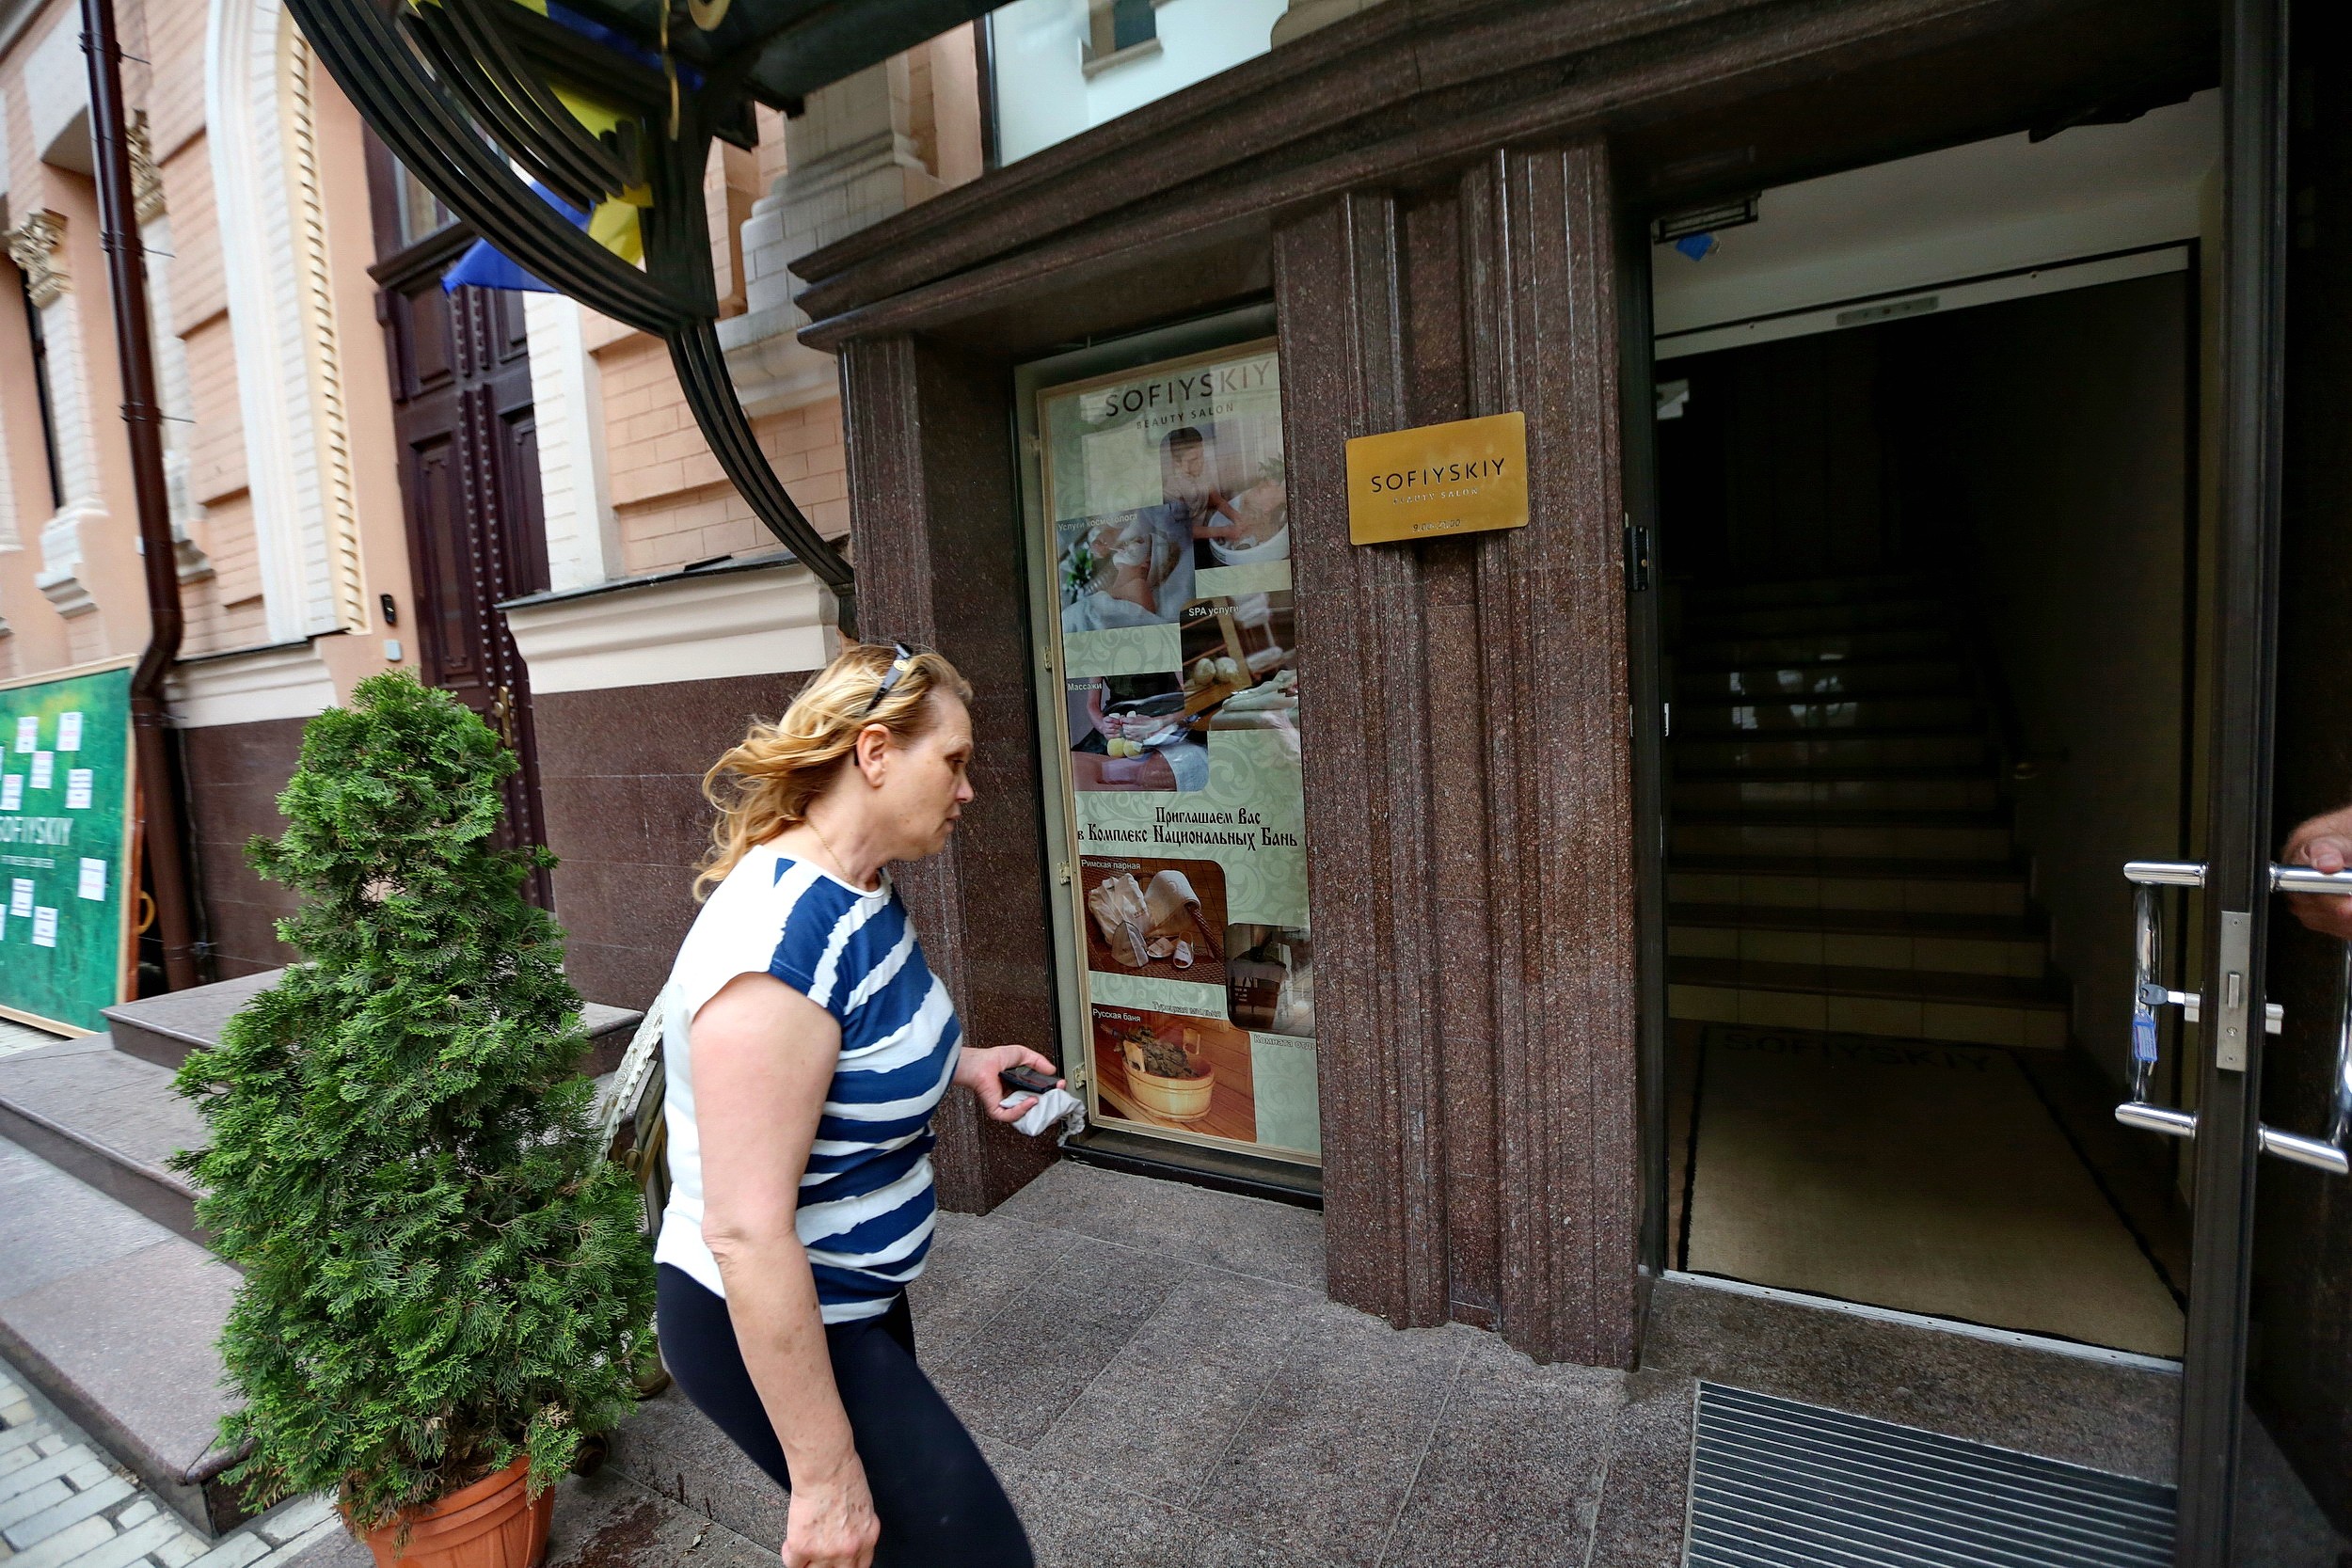 Iryna Ryabchenko, one of the owners of Sofiyskiy Fitness Centre, walks into one of the entrances of the fitness center in Kyiv on June 13.